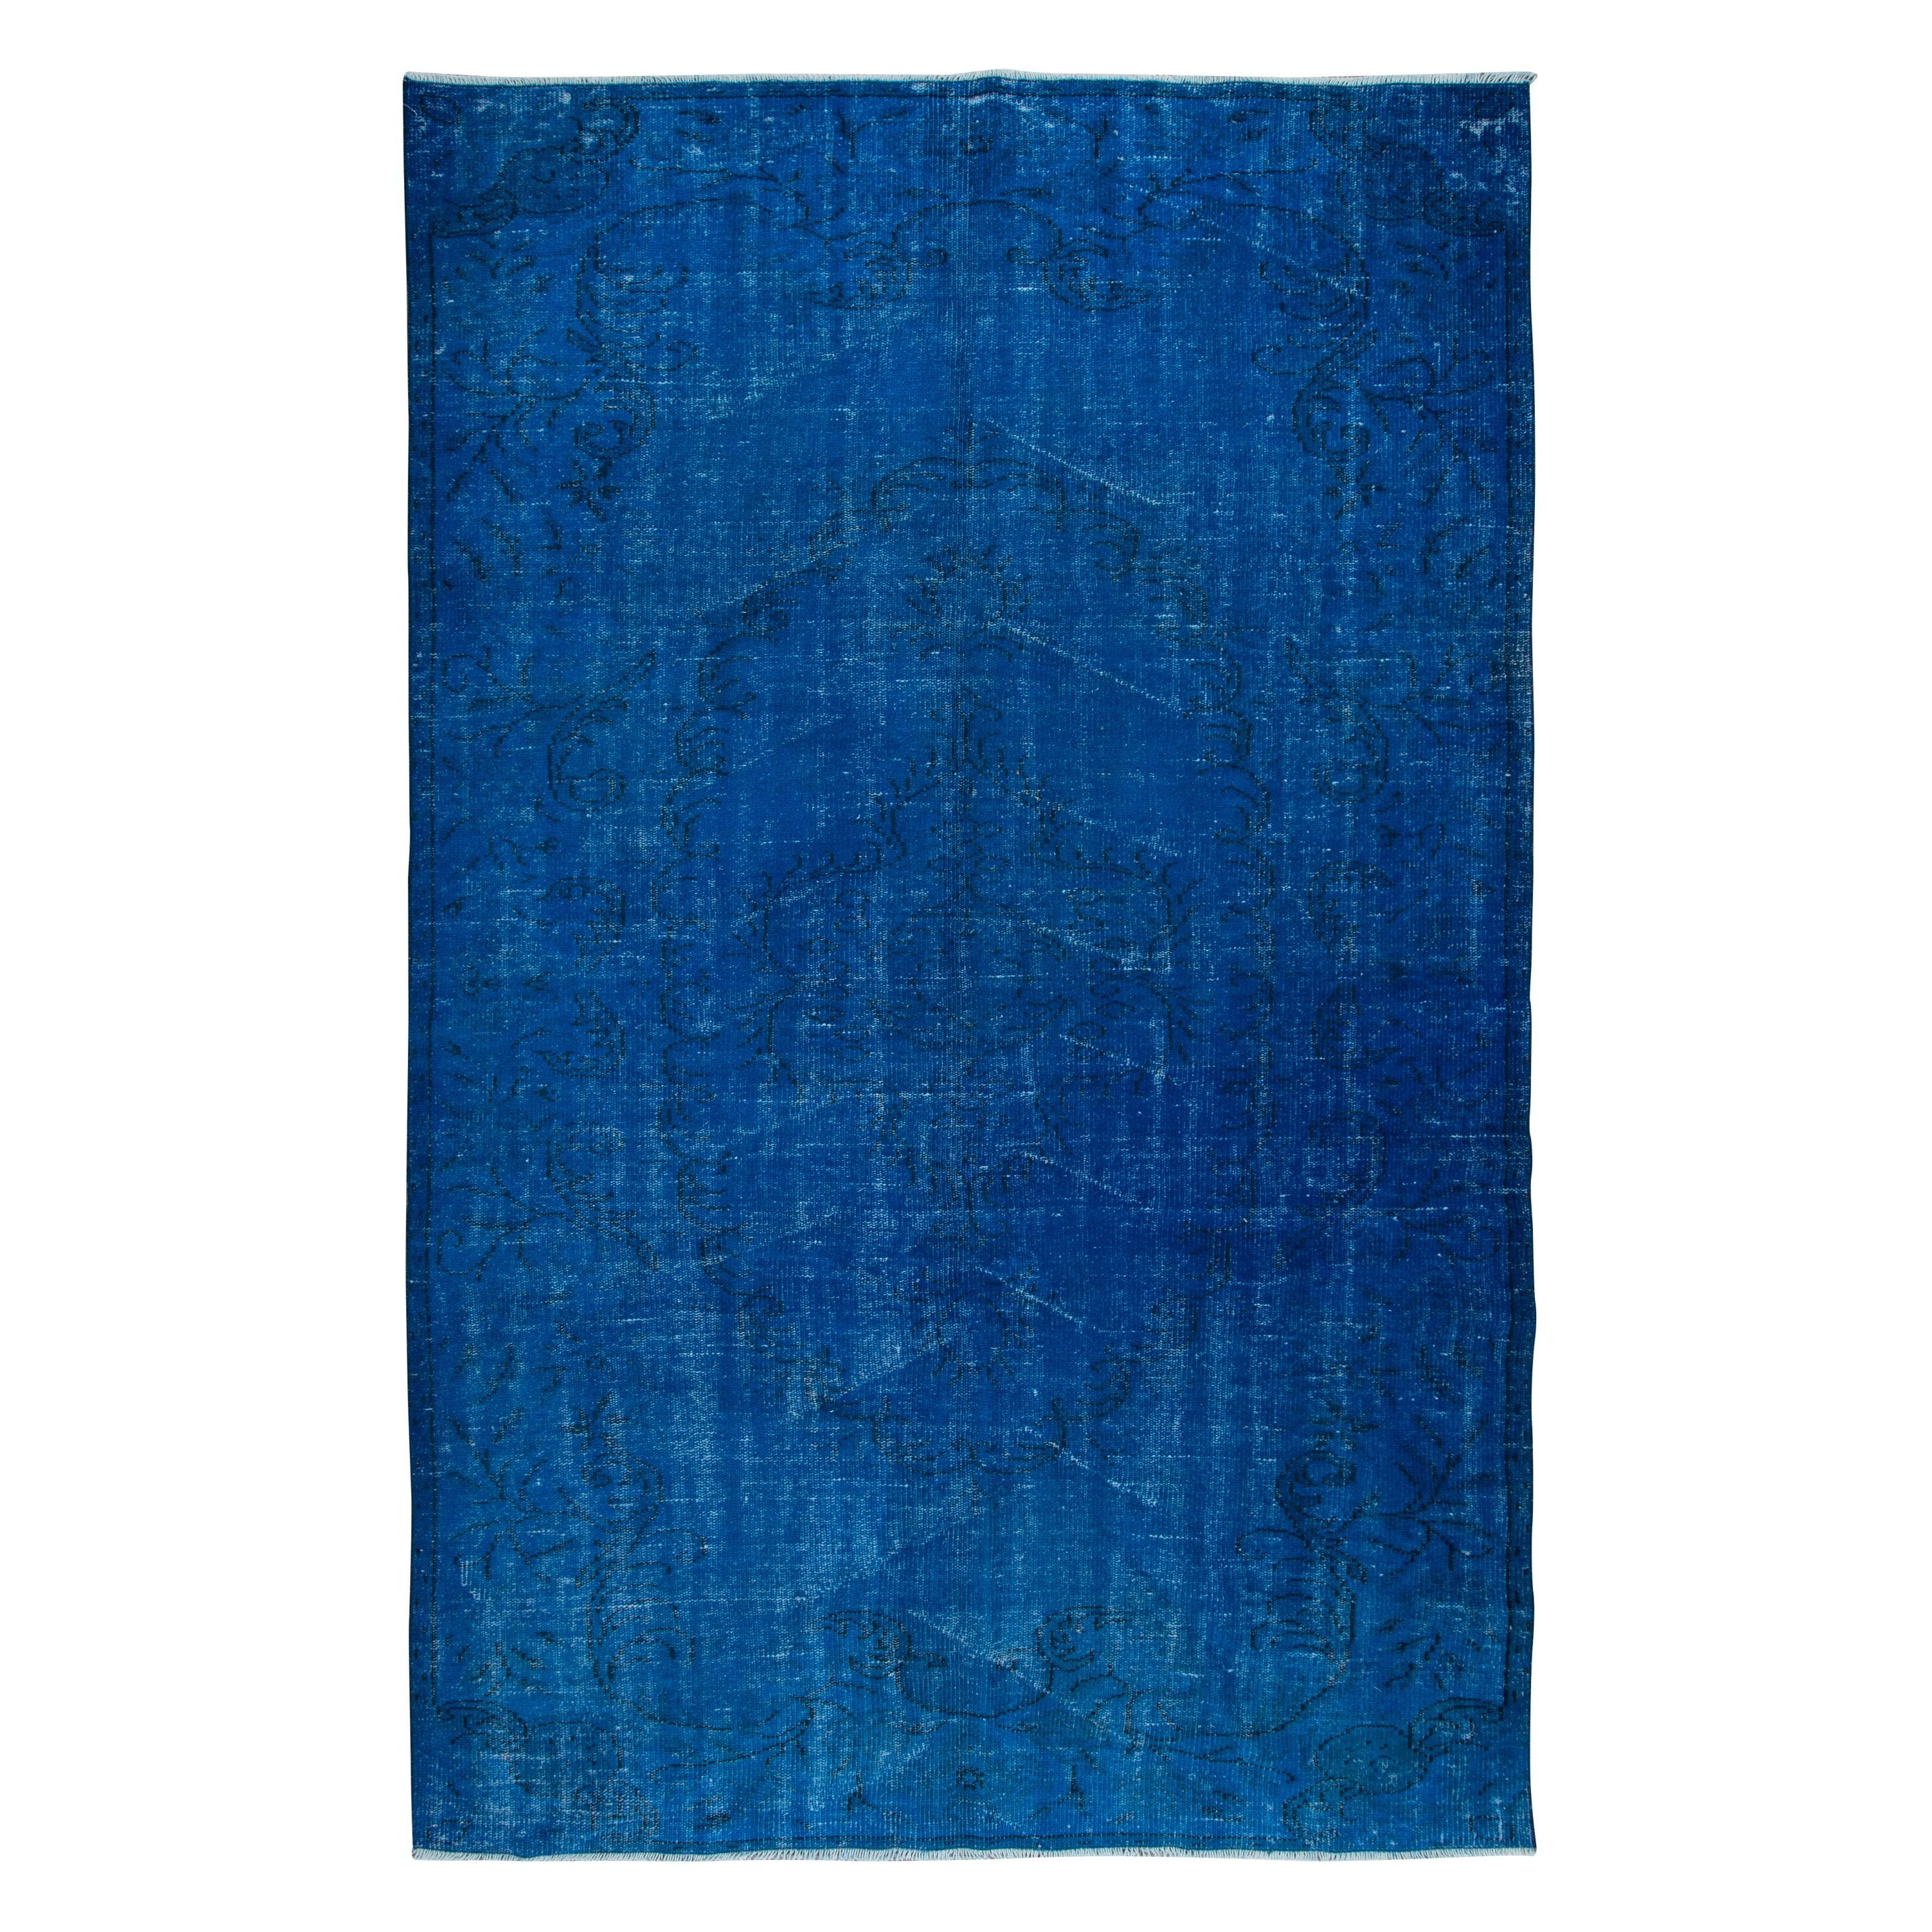 5.7x9.4 Ft Modern Blue area rug, Handwoven and Handknotted in Isparta, Turkey